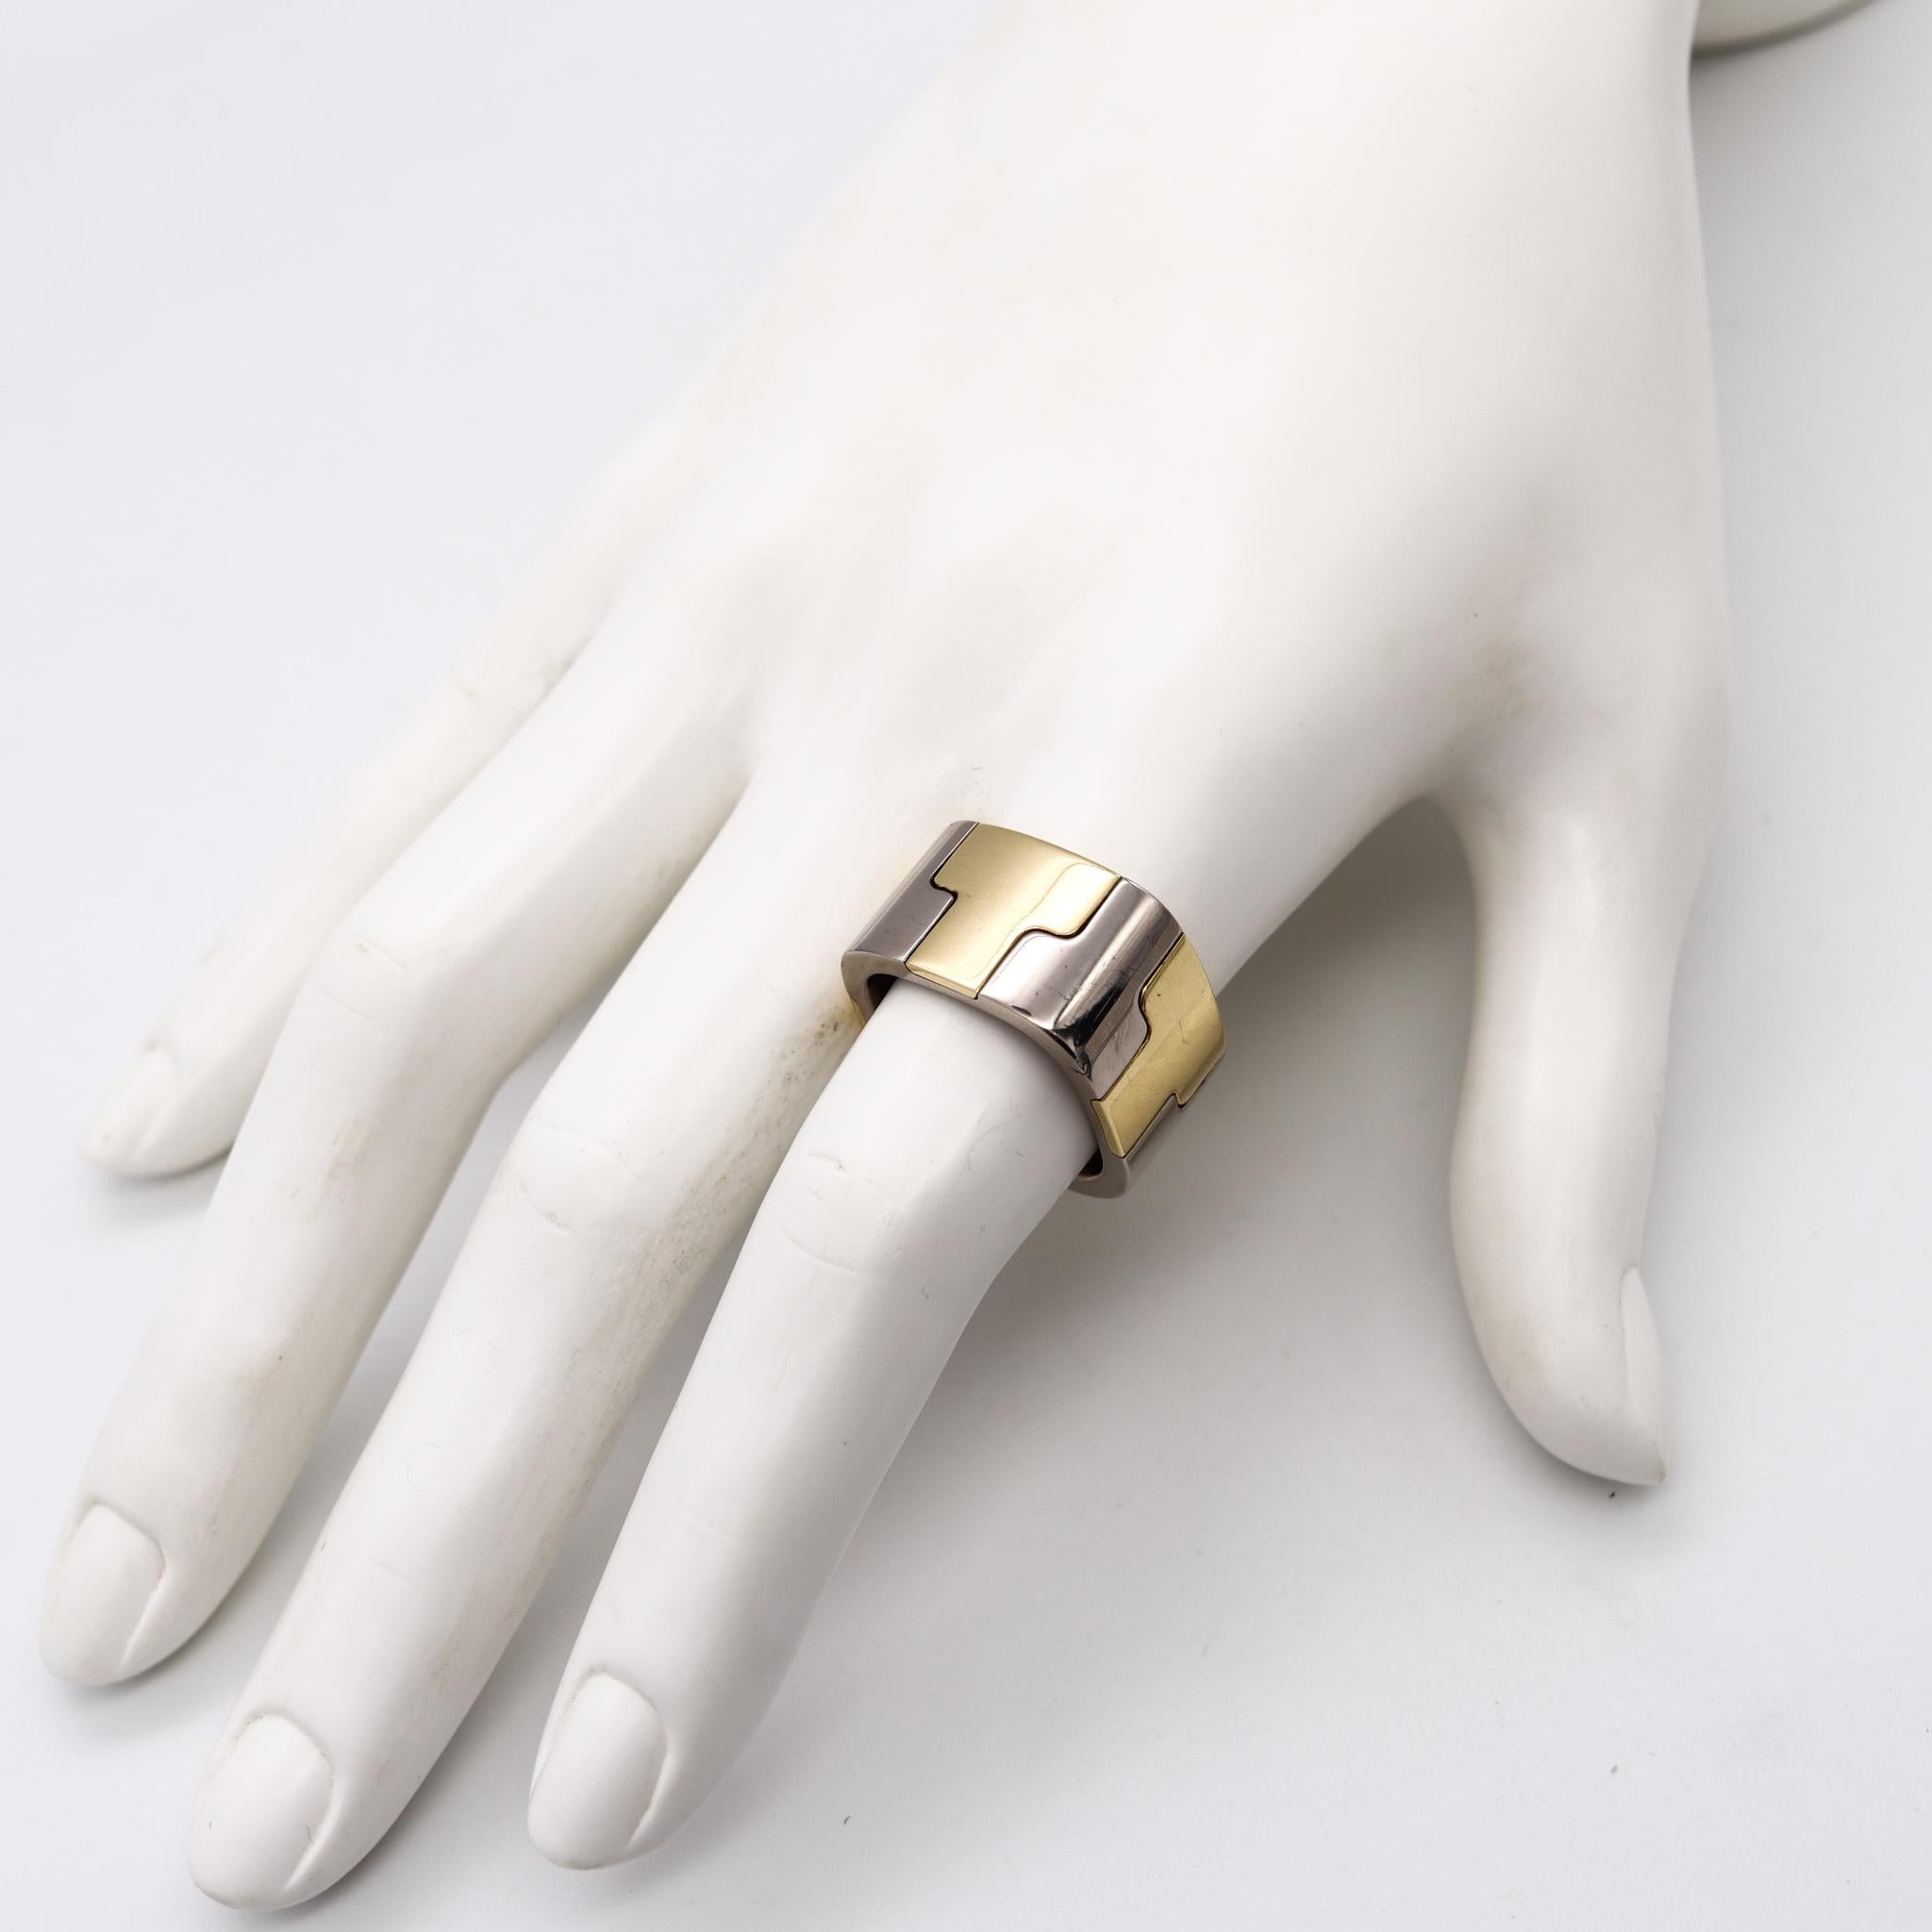 Modernist Gubelin 1970 by Paul Binder Geometric Puzzle Ring in Two Tones of 18Kt Gold For Sale